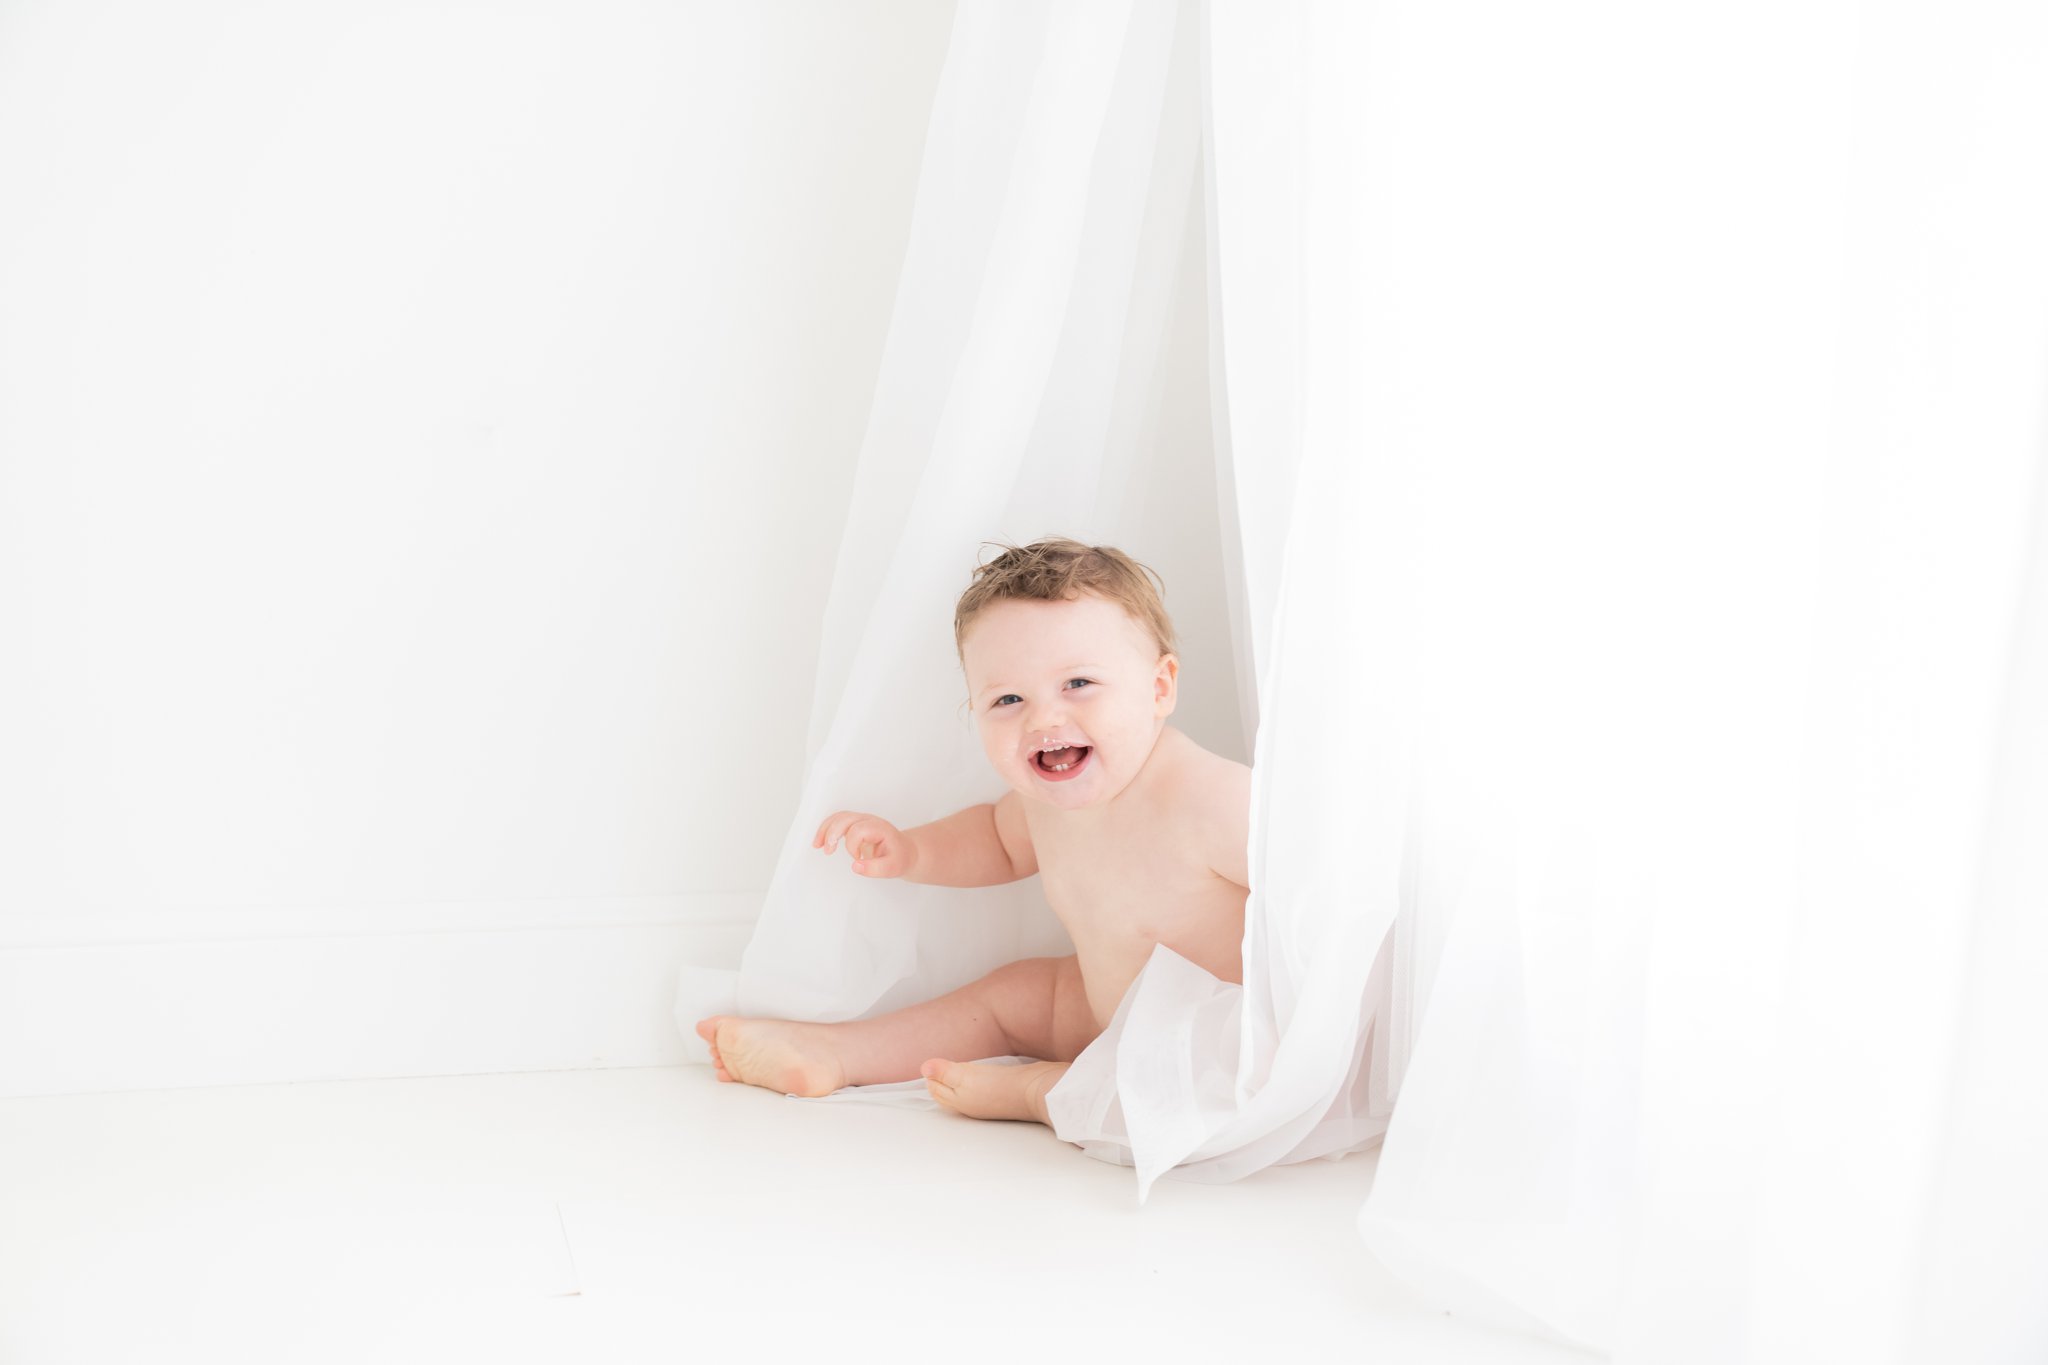 One year old baby iplaying in white sheer curtains in south florida baby photography studio. 